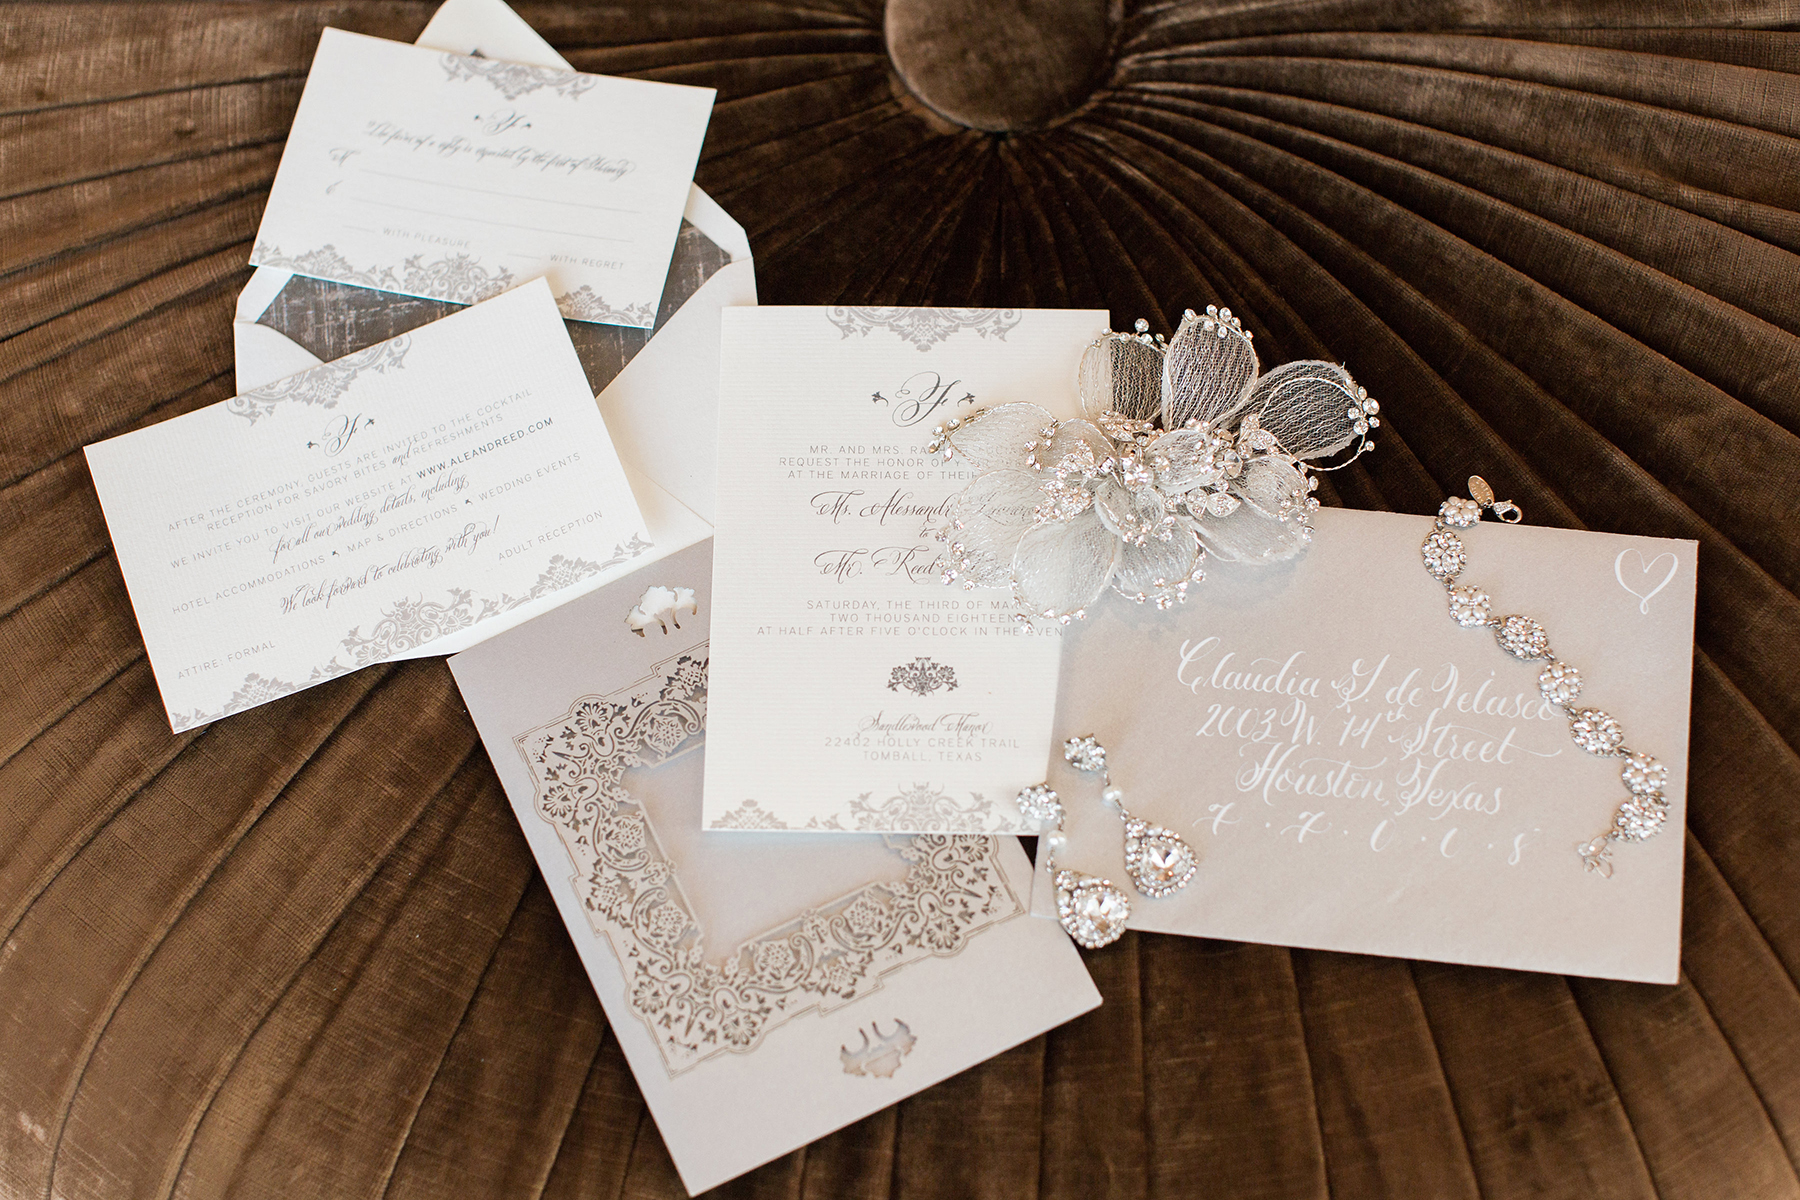  daytoremember.net | Kelly Hornberger Photography | Wedding Stationery | A Day To Remember Houston Wedding Planning and Design 